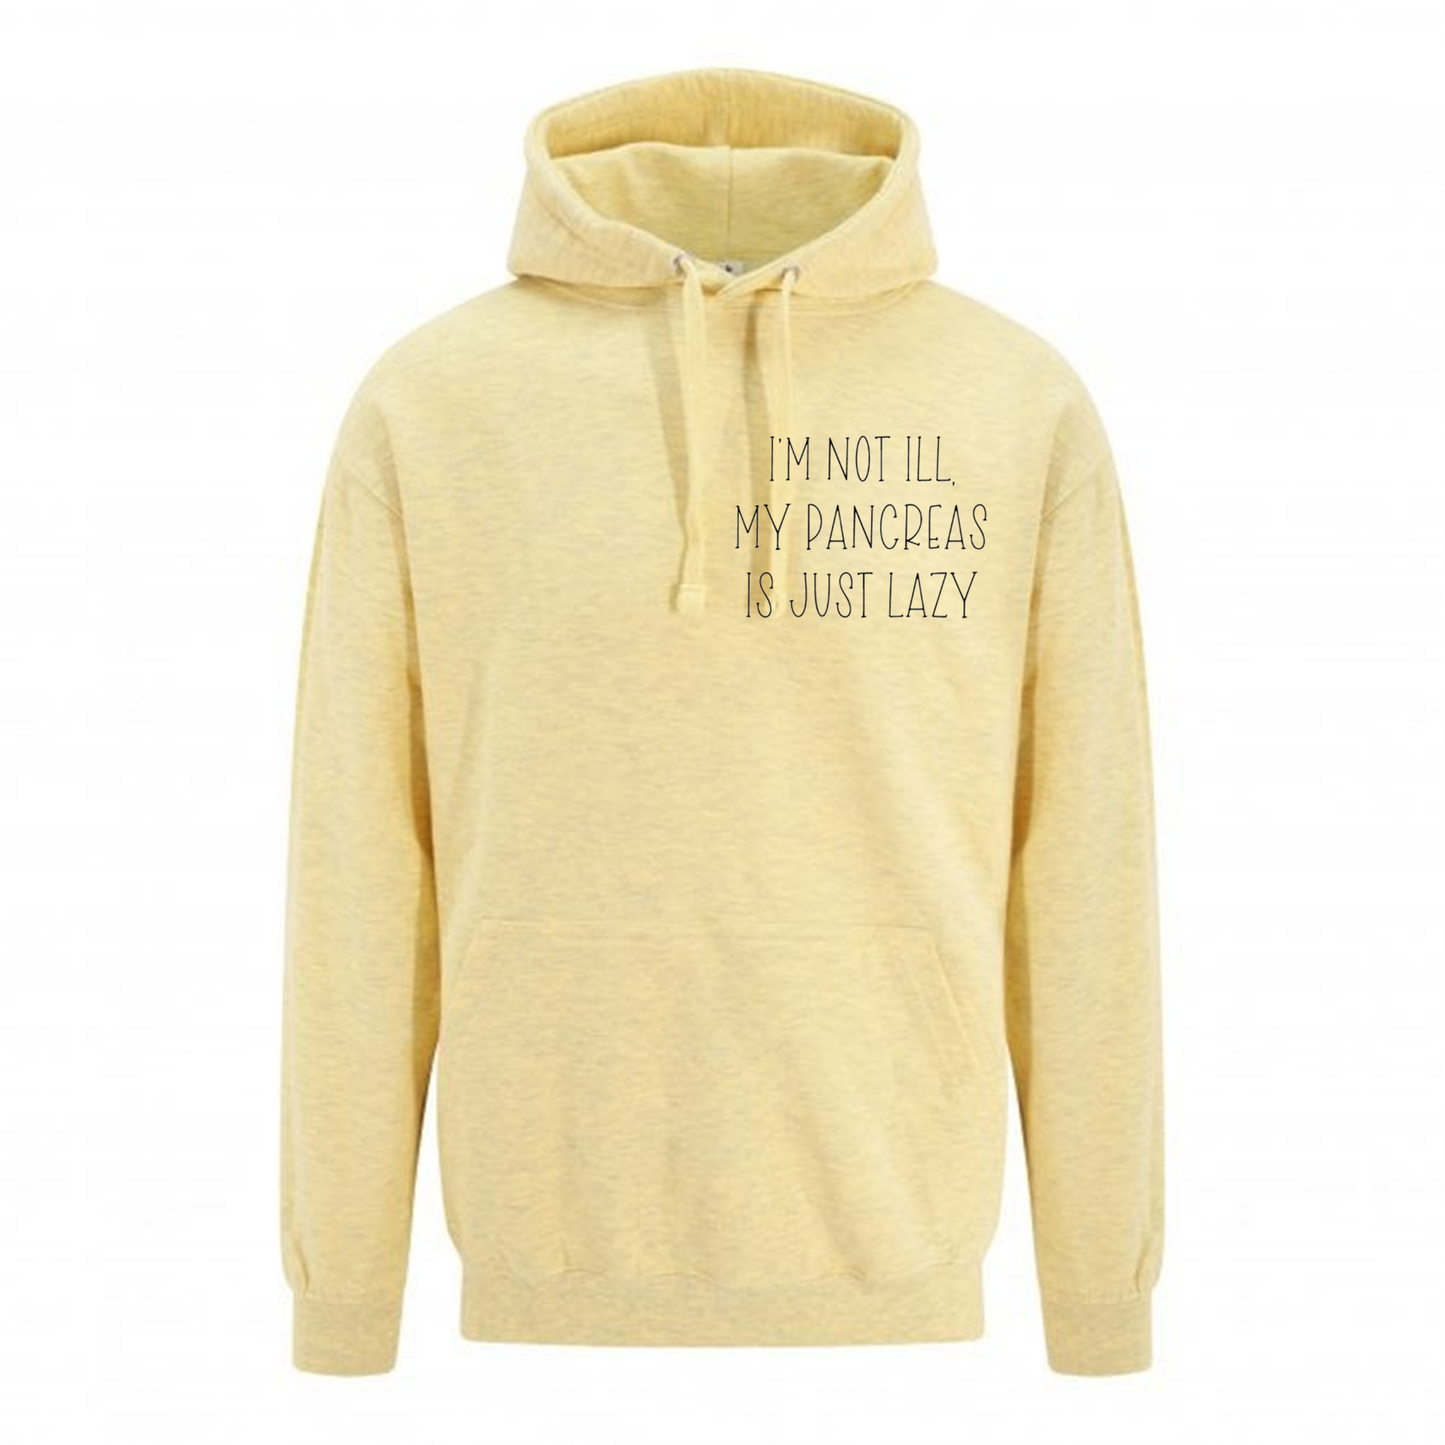 I'm Not Ill, My Pancreas Is Just Lazy Pastel Hoodie